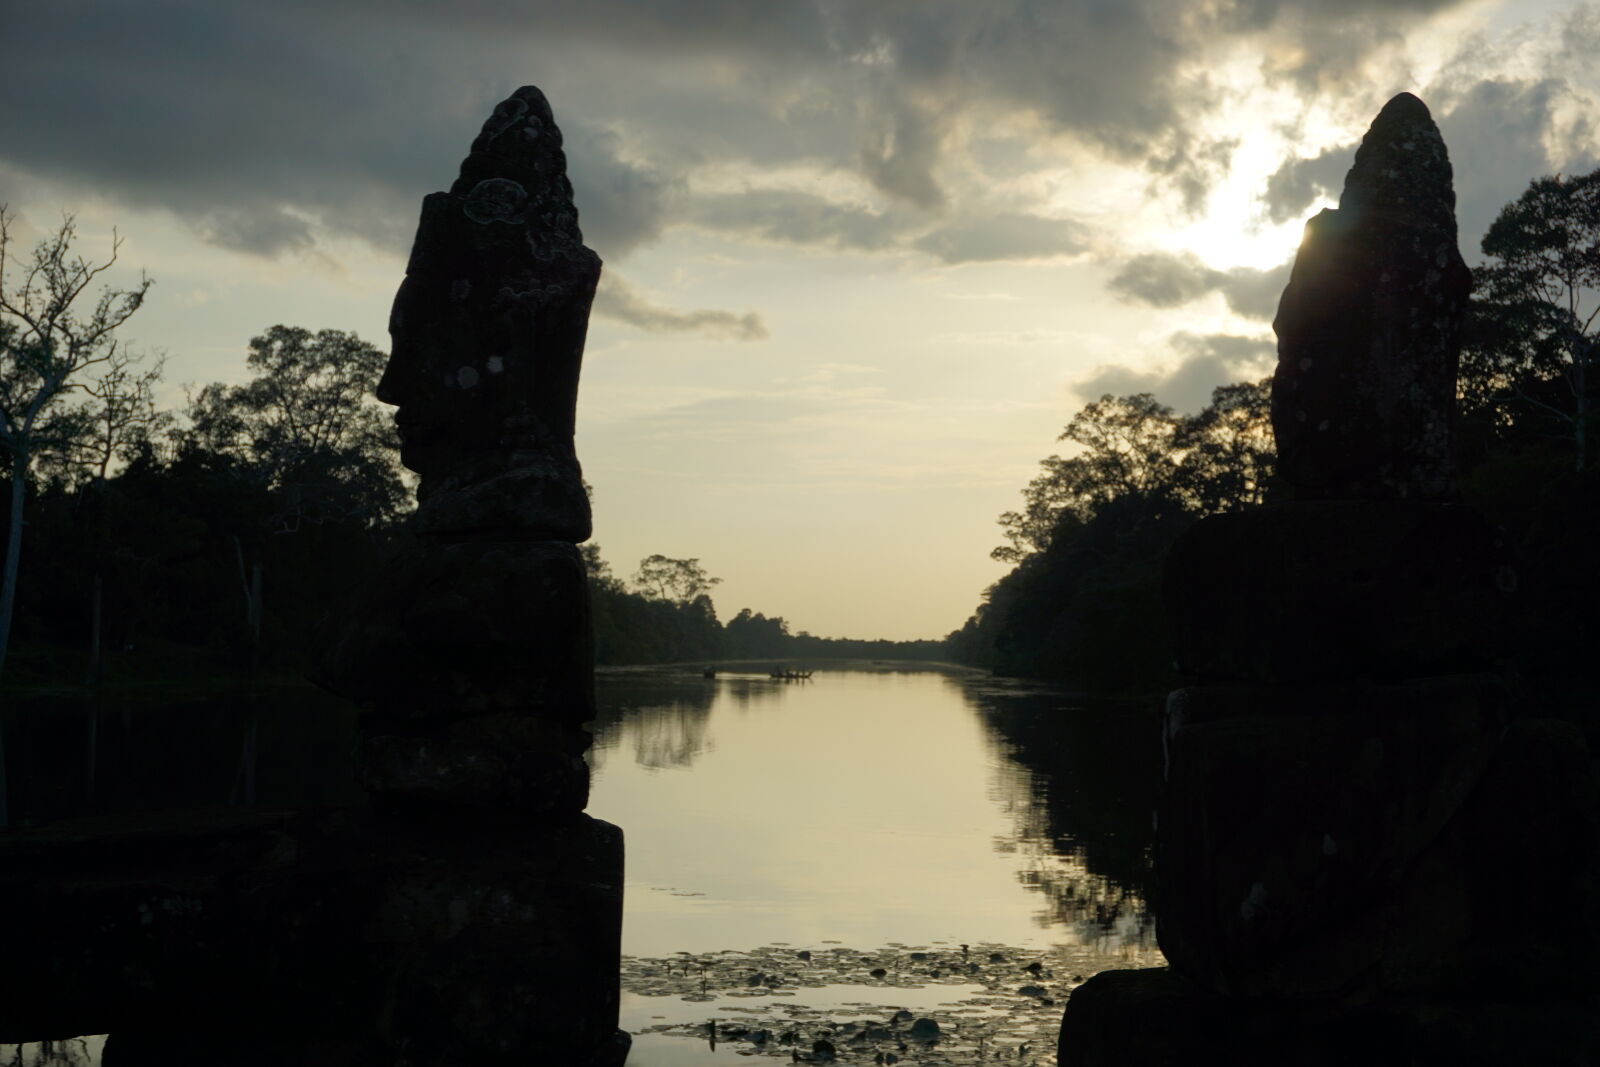 Sony a6000 sample photo. Cambodia, river, statue, sunset photography